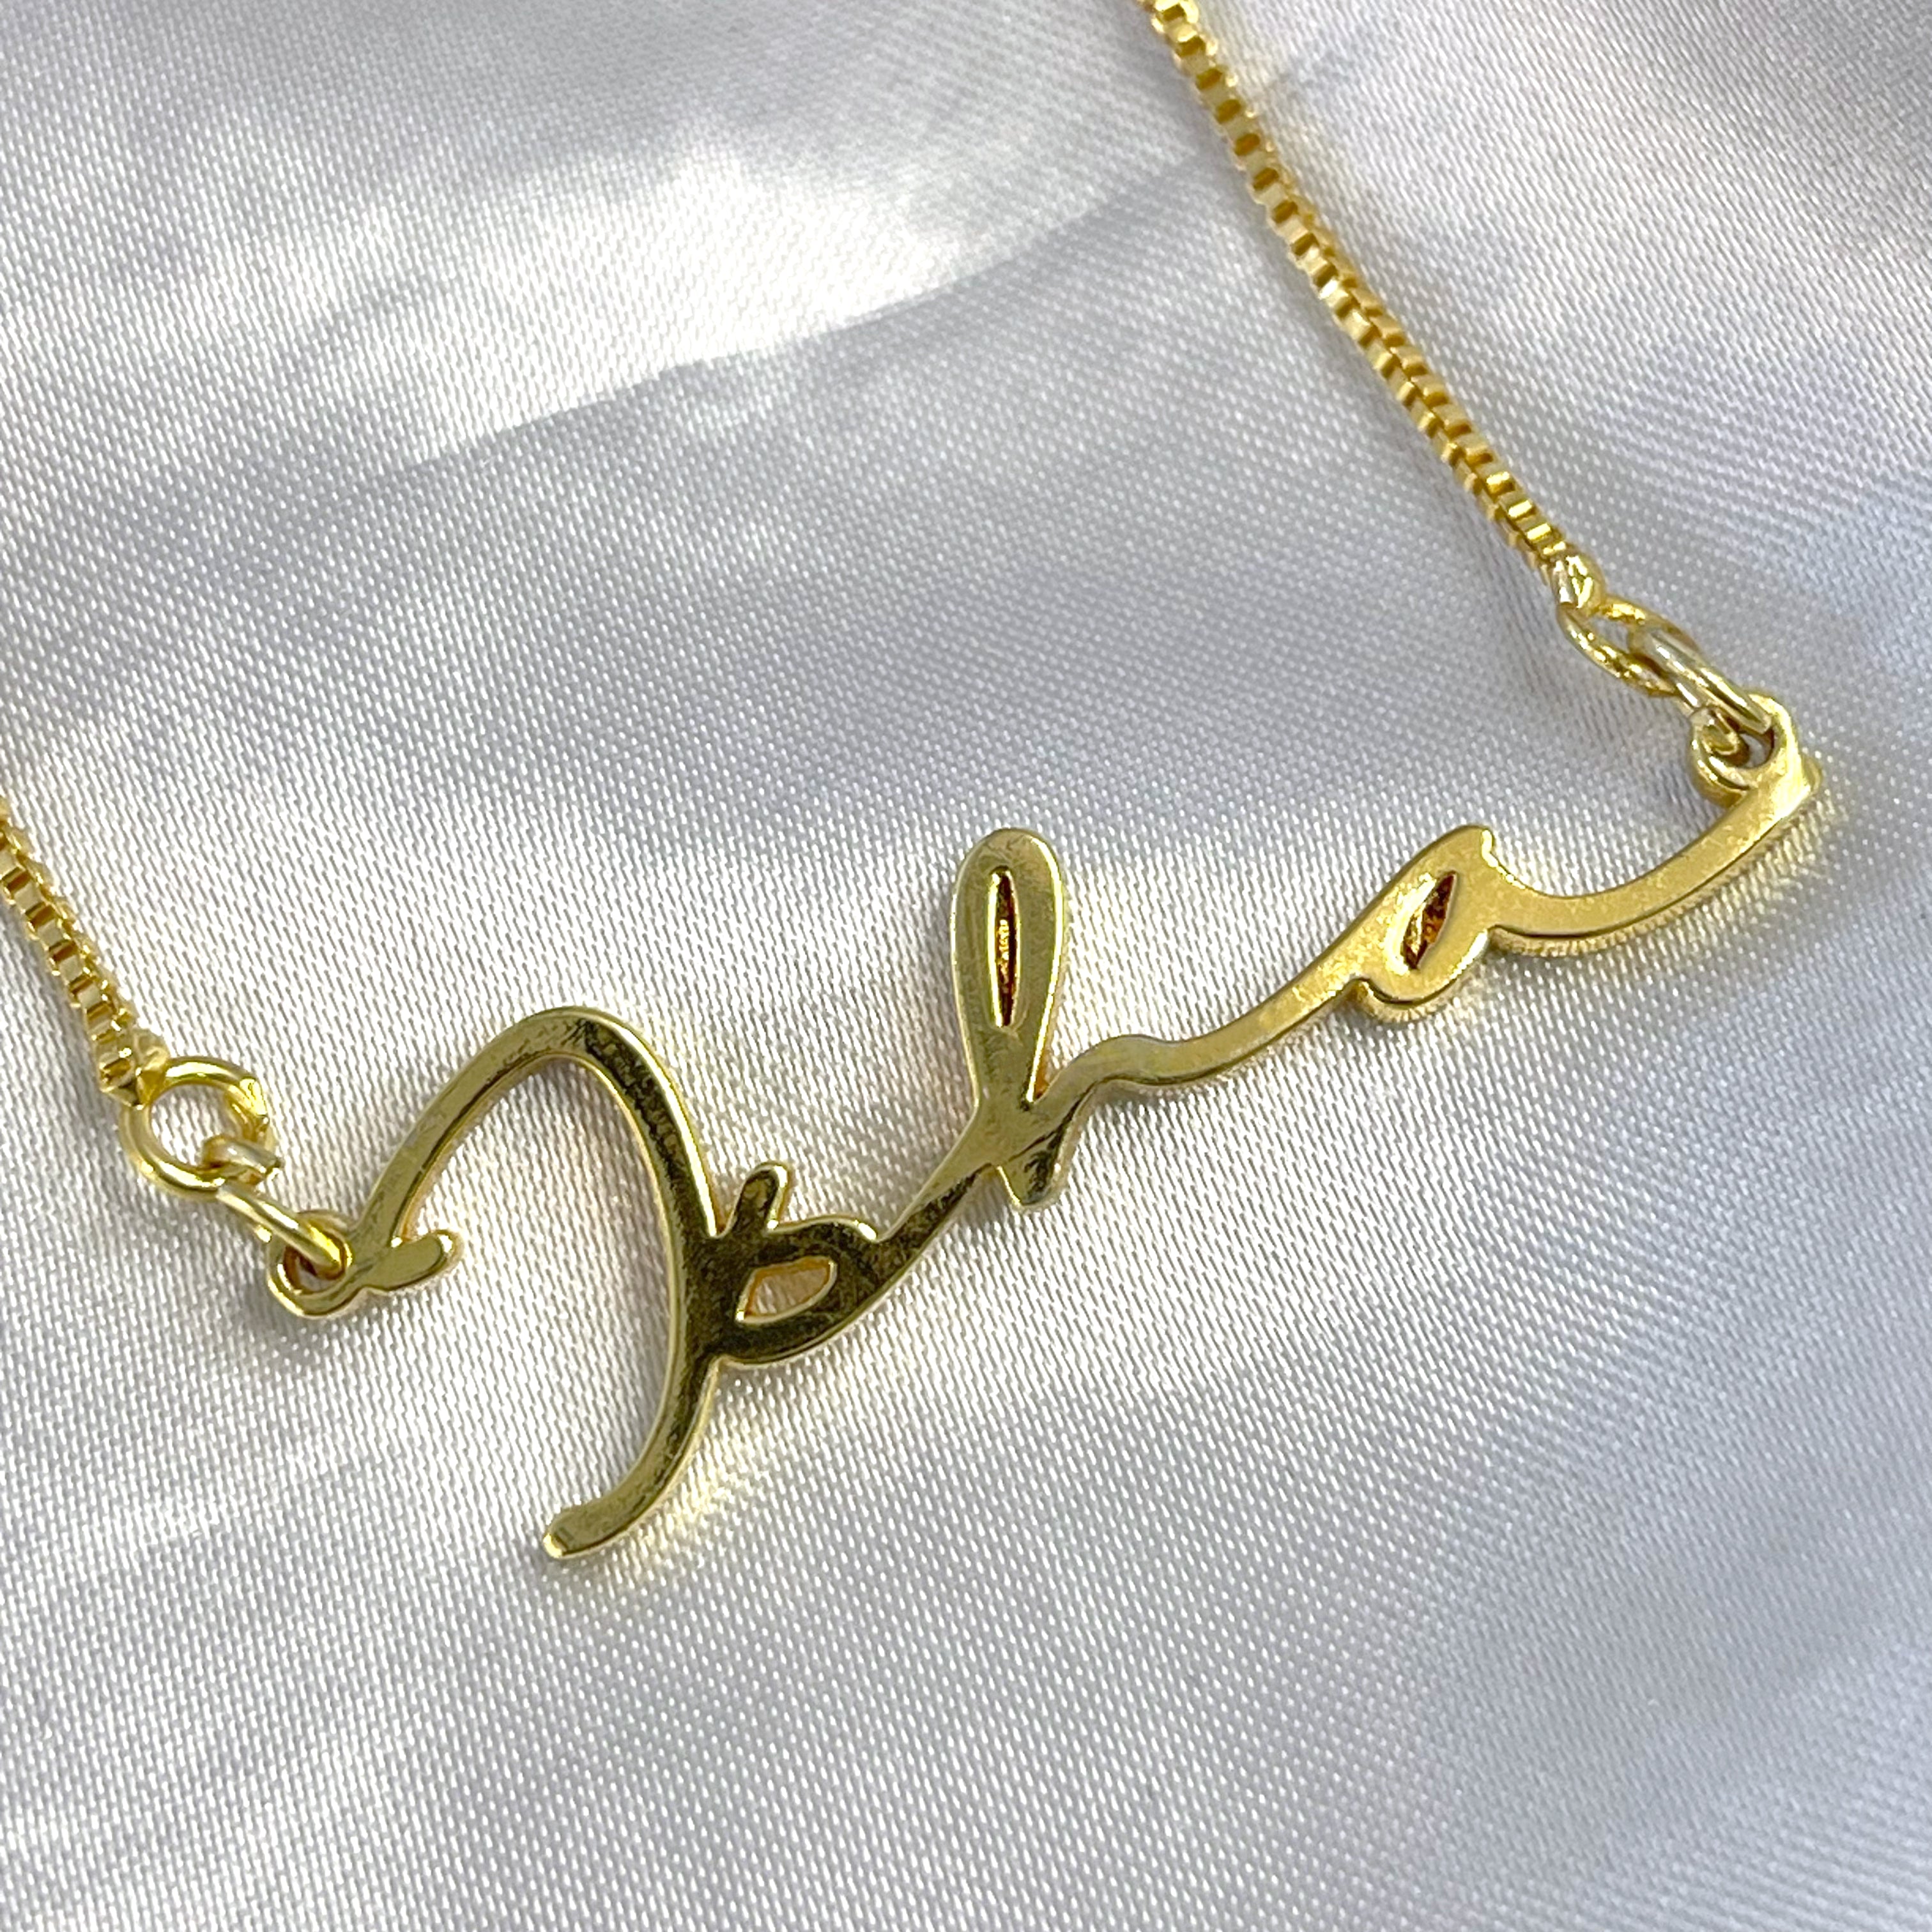 Personalised Name Necklace - Gold